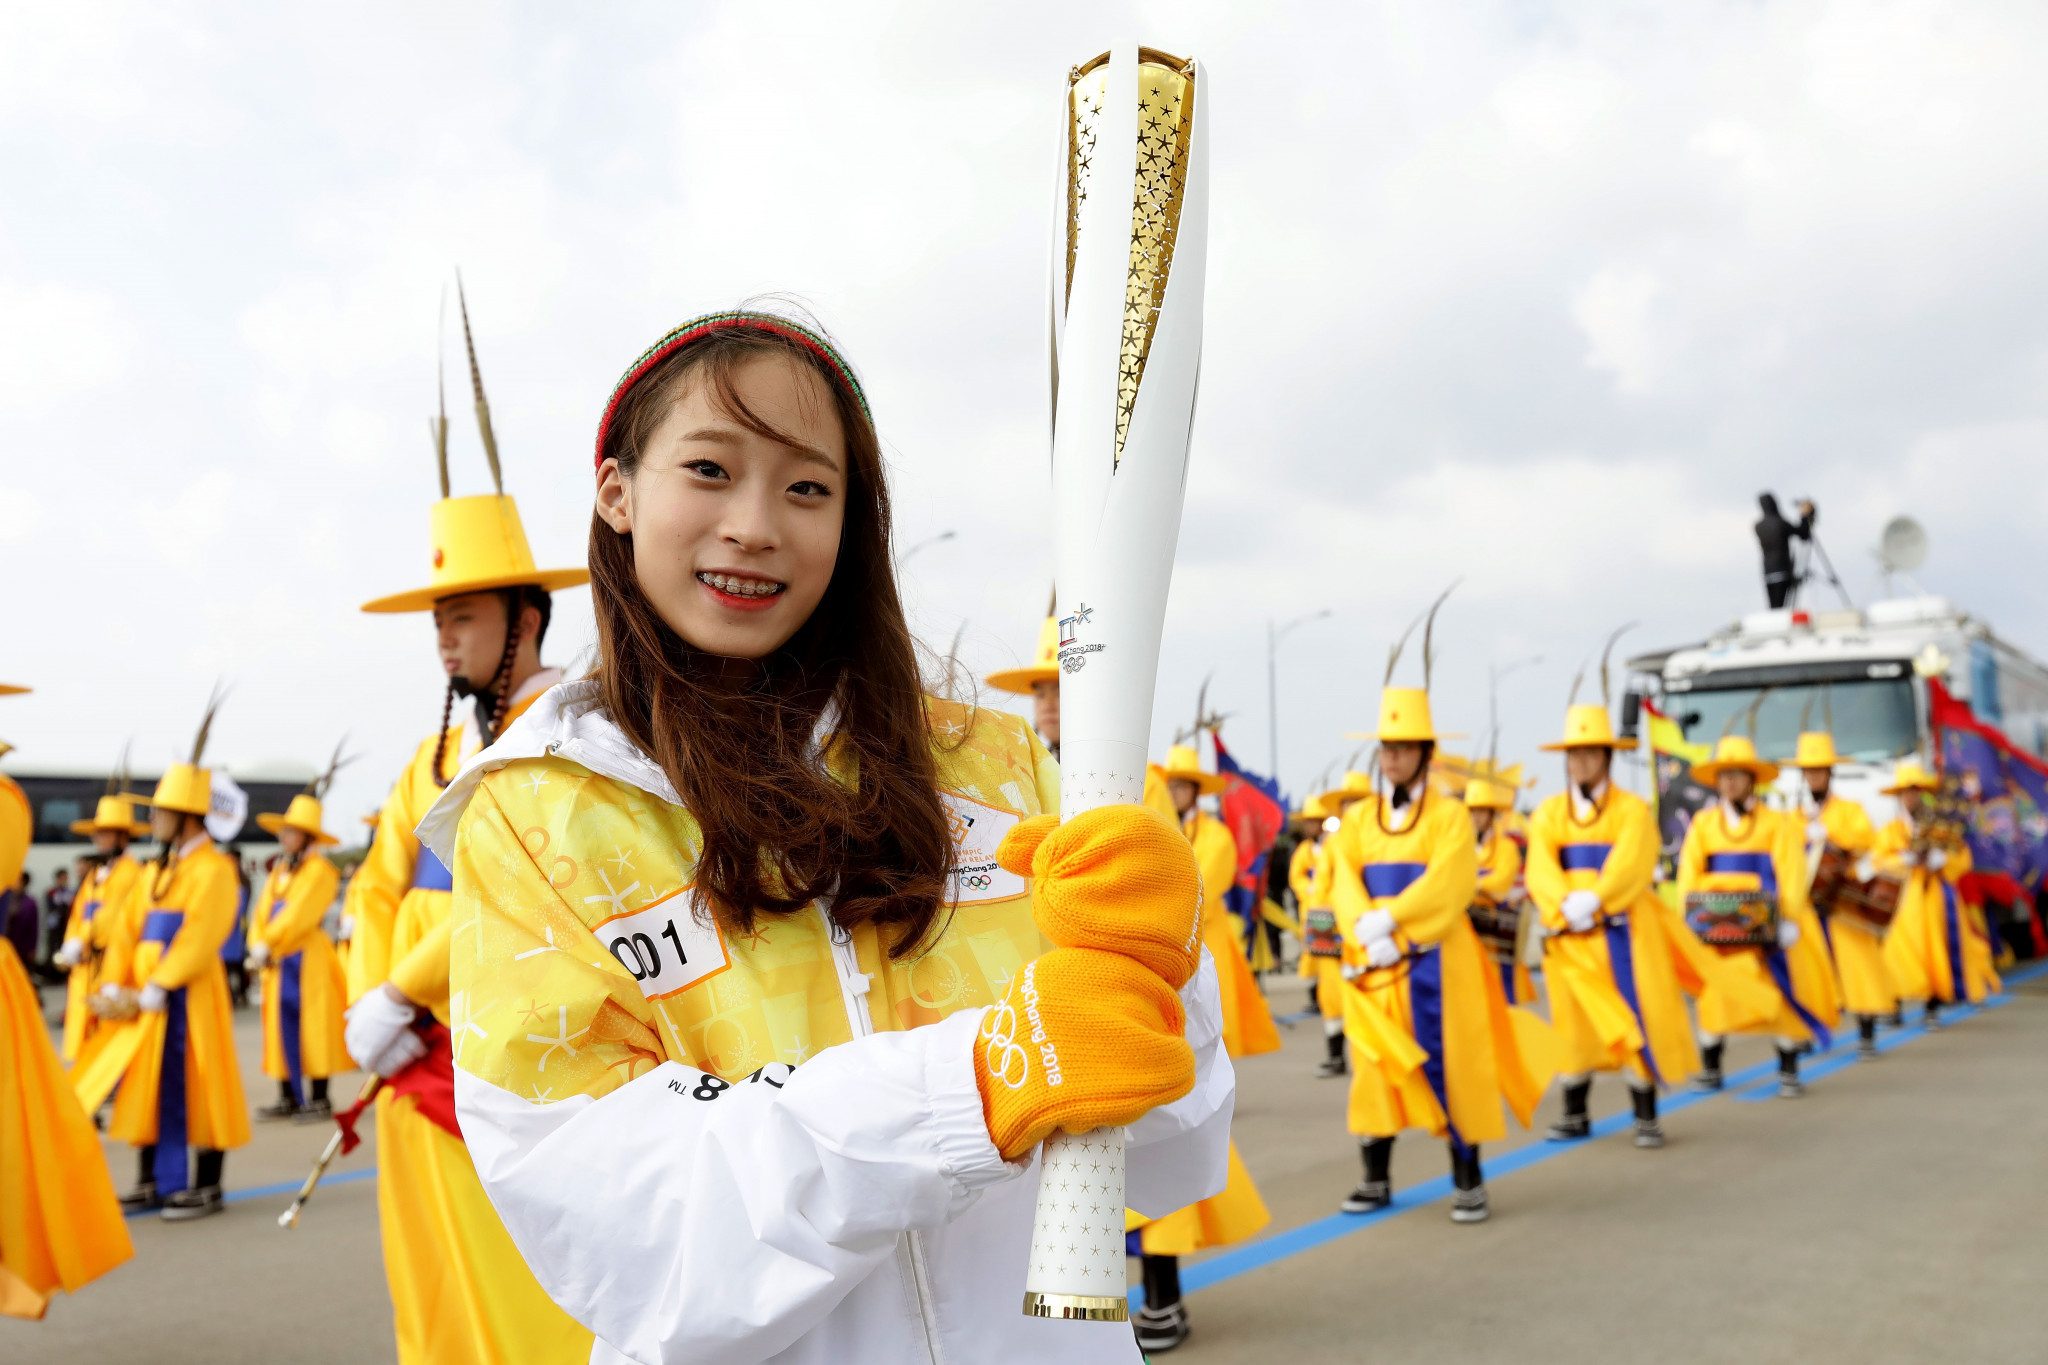 Venues and villages complete as Pyeongchang is primed to deliver a memorable Winter Olympics